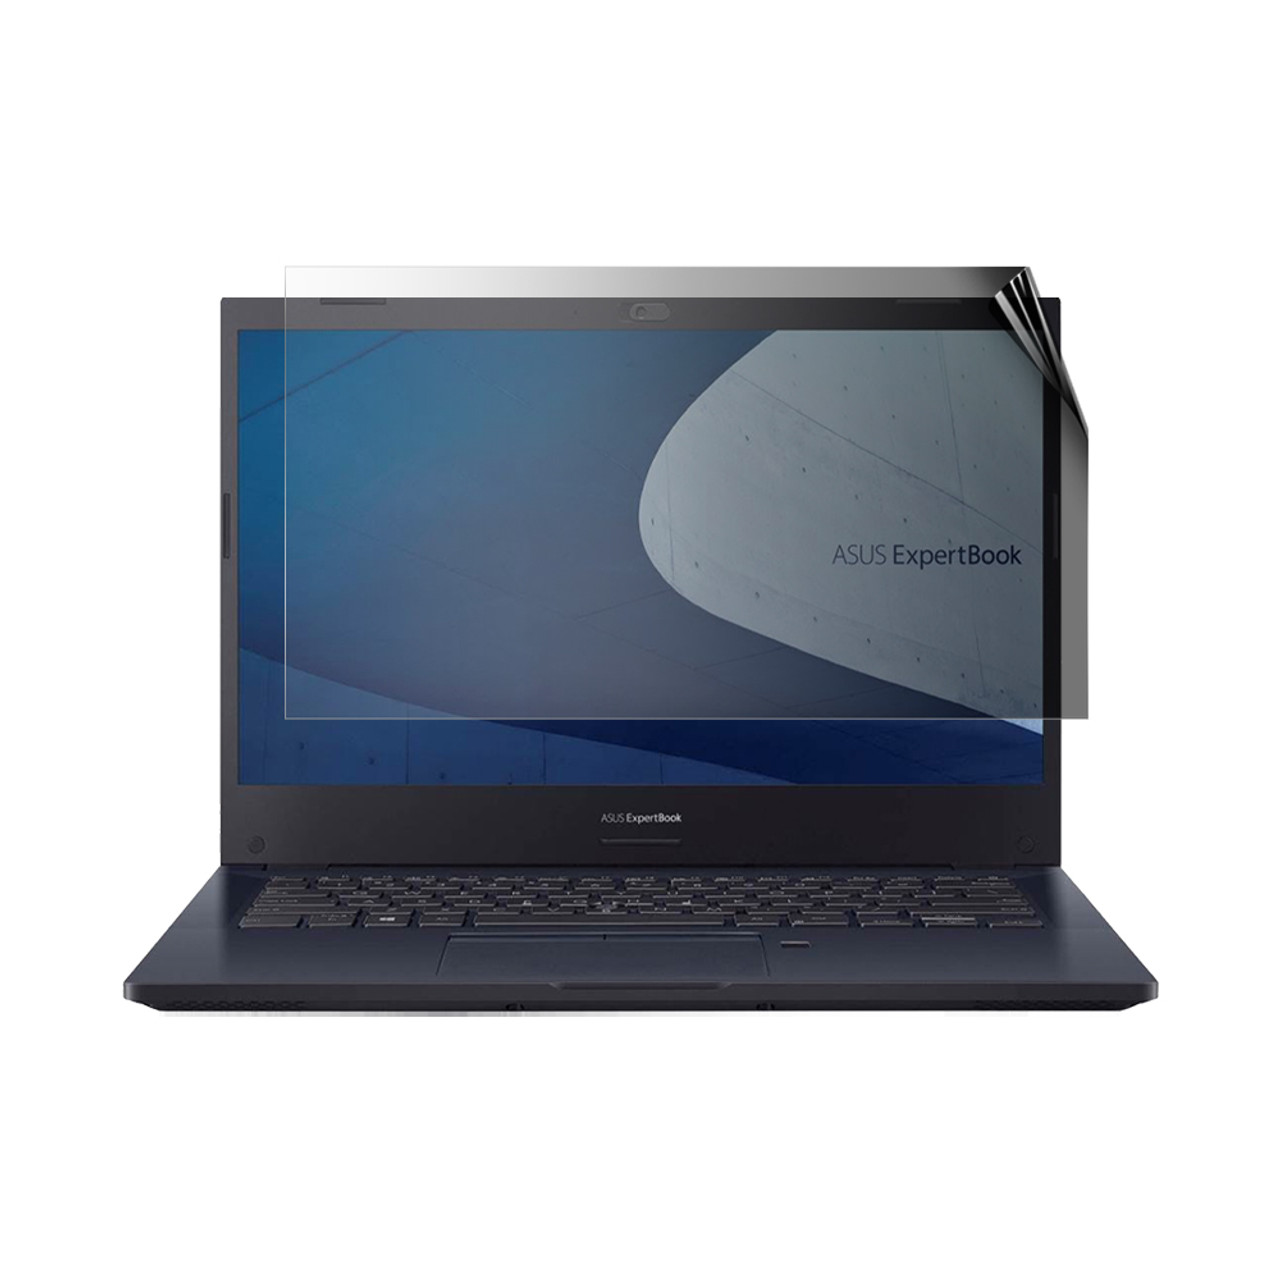 Asus ExpertBook 14 P2451 Screen Protector - Privacy